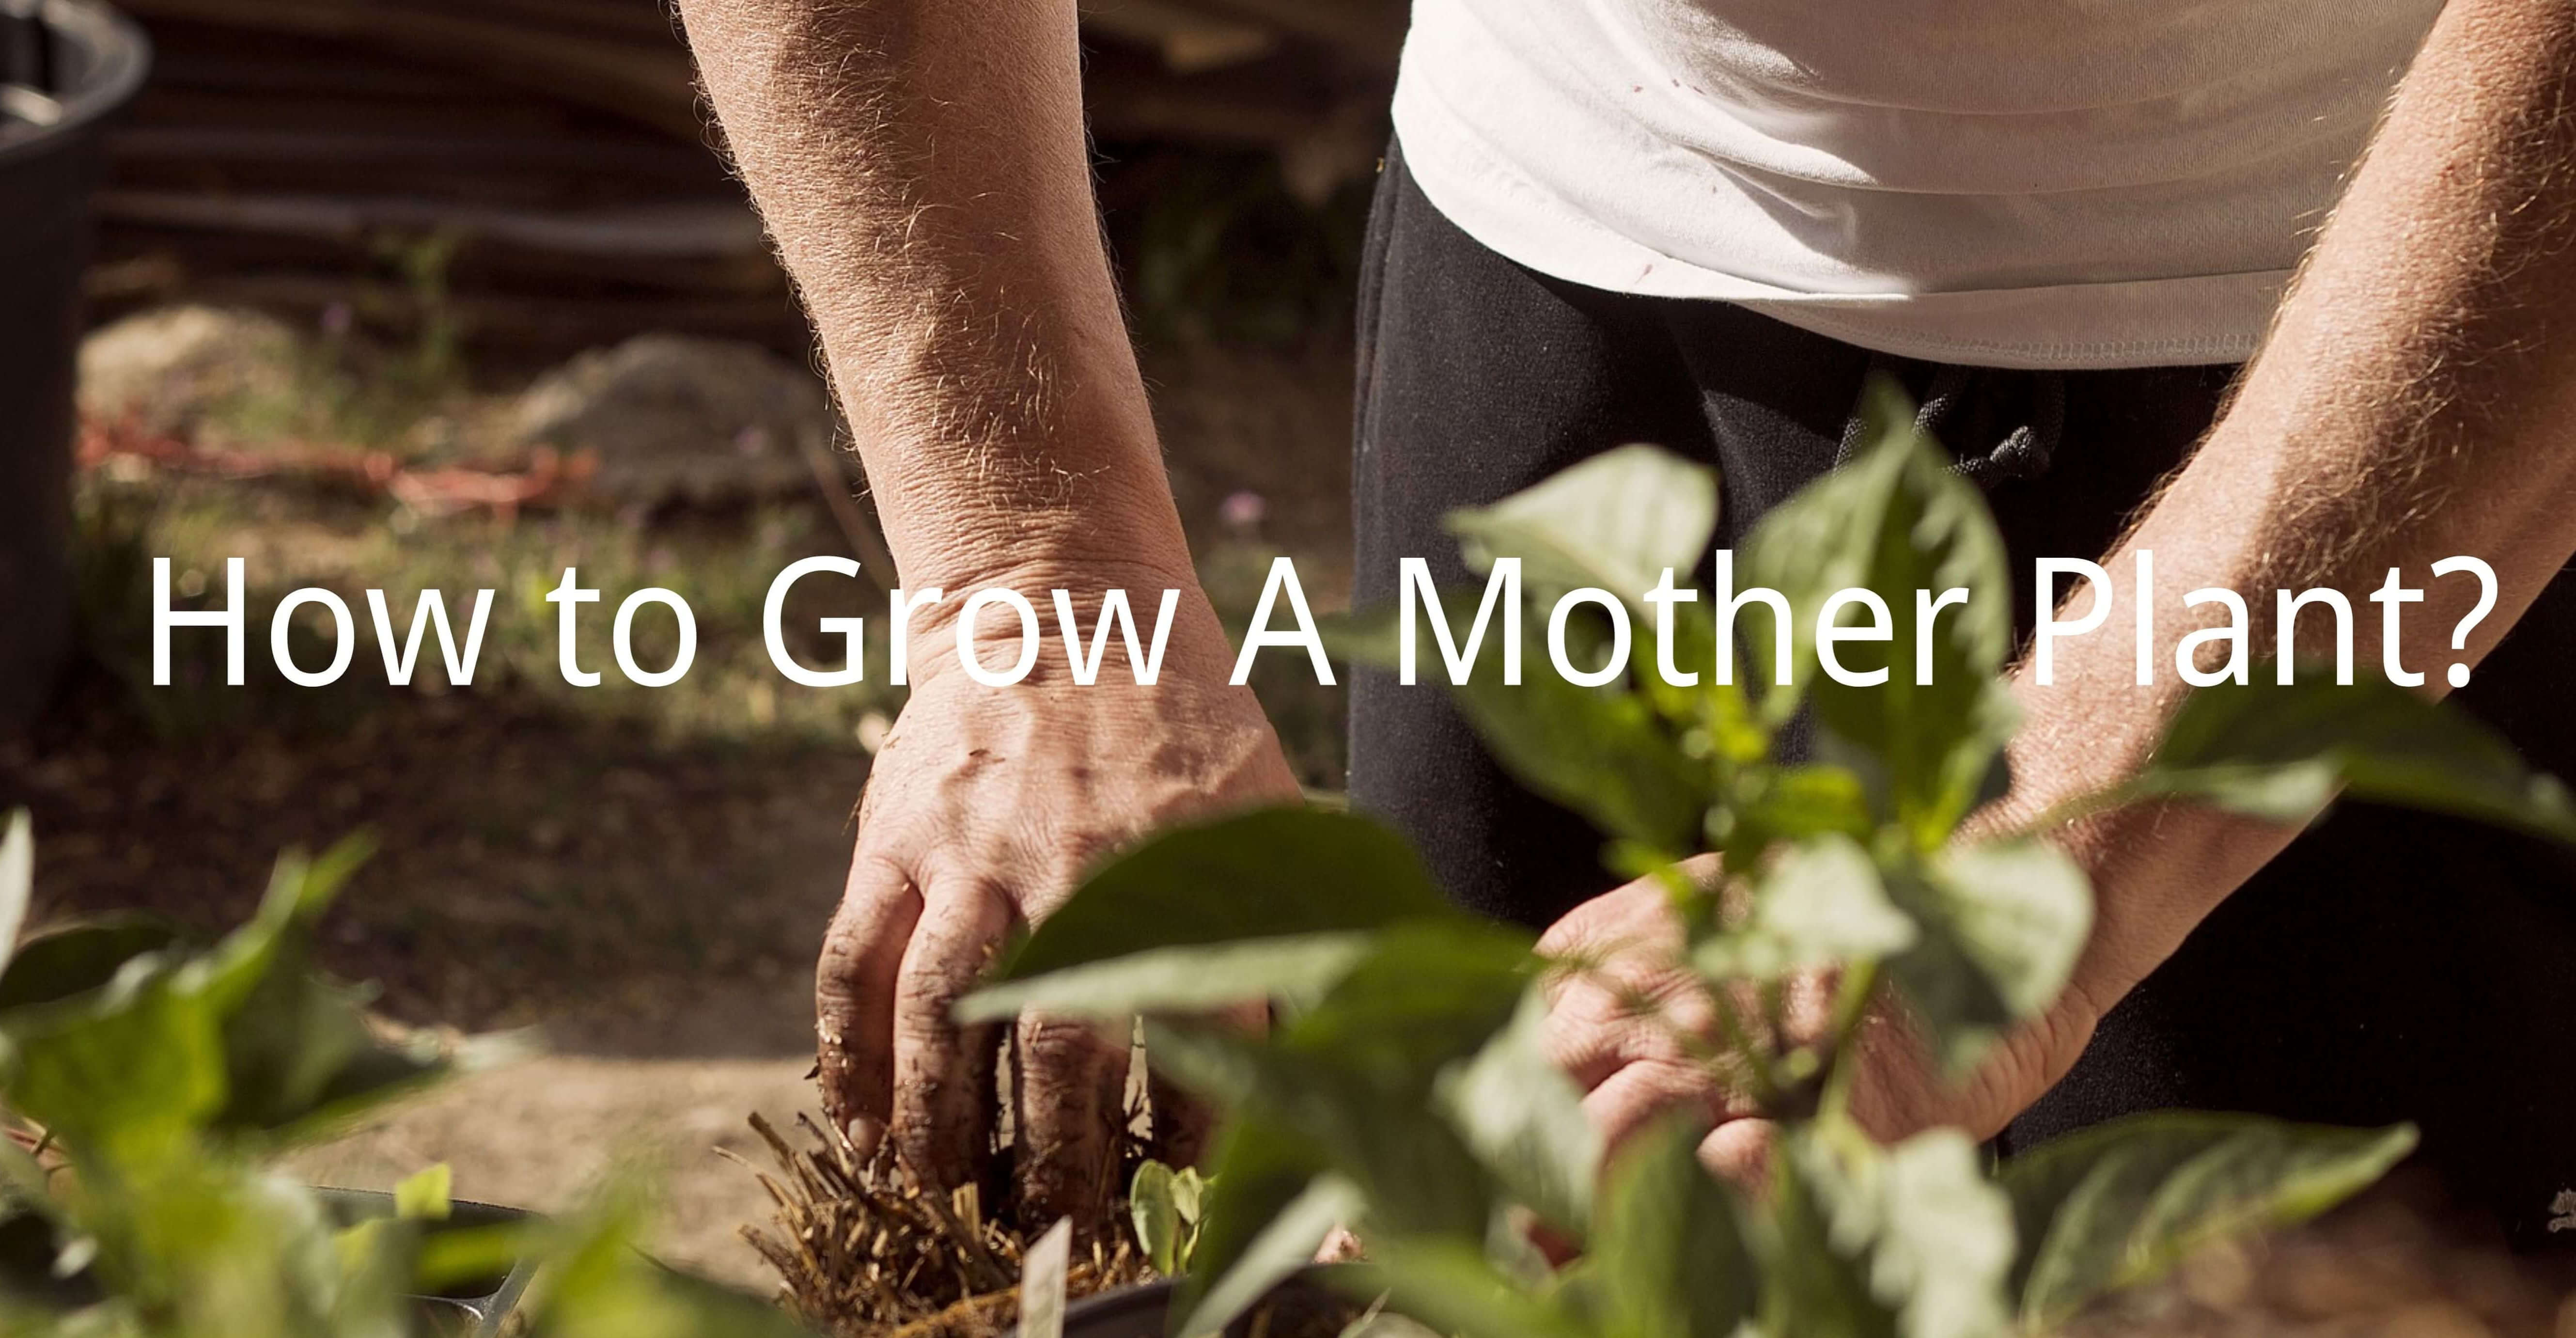 How to Grow A Mother Plant?